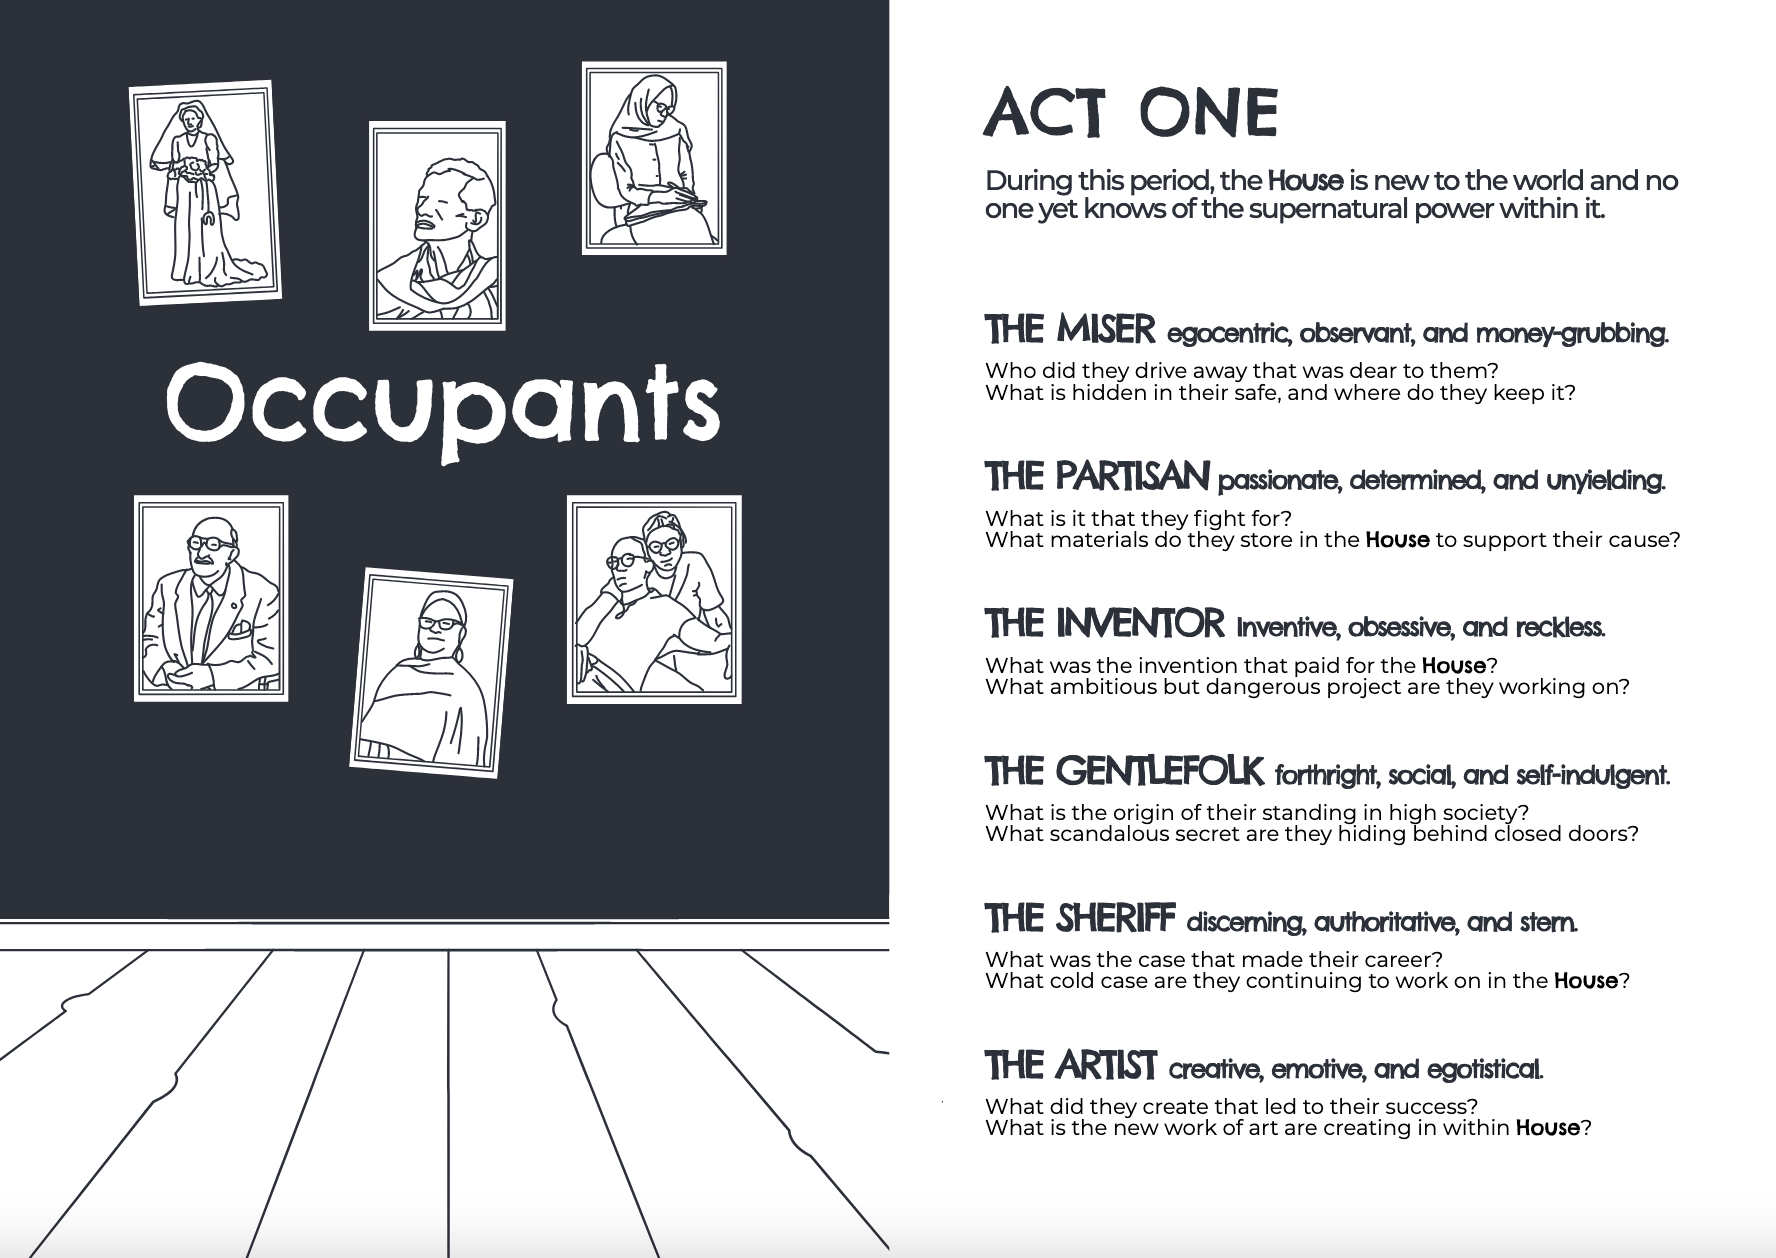 A spread from the pdf. The left page is a section is titled 'occupants' with simple art of portraits on a wall. The right page describes 'Act One' and 6 occupants that you can choose from. 